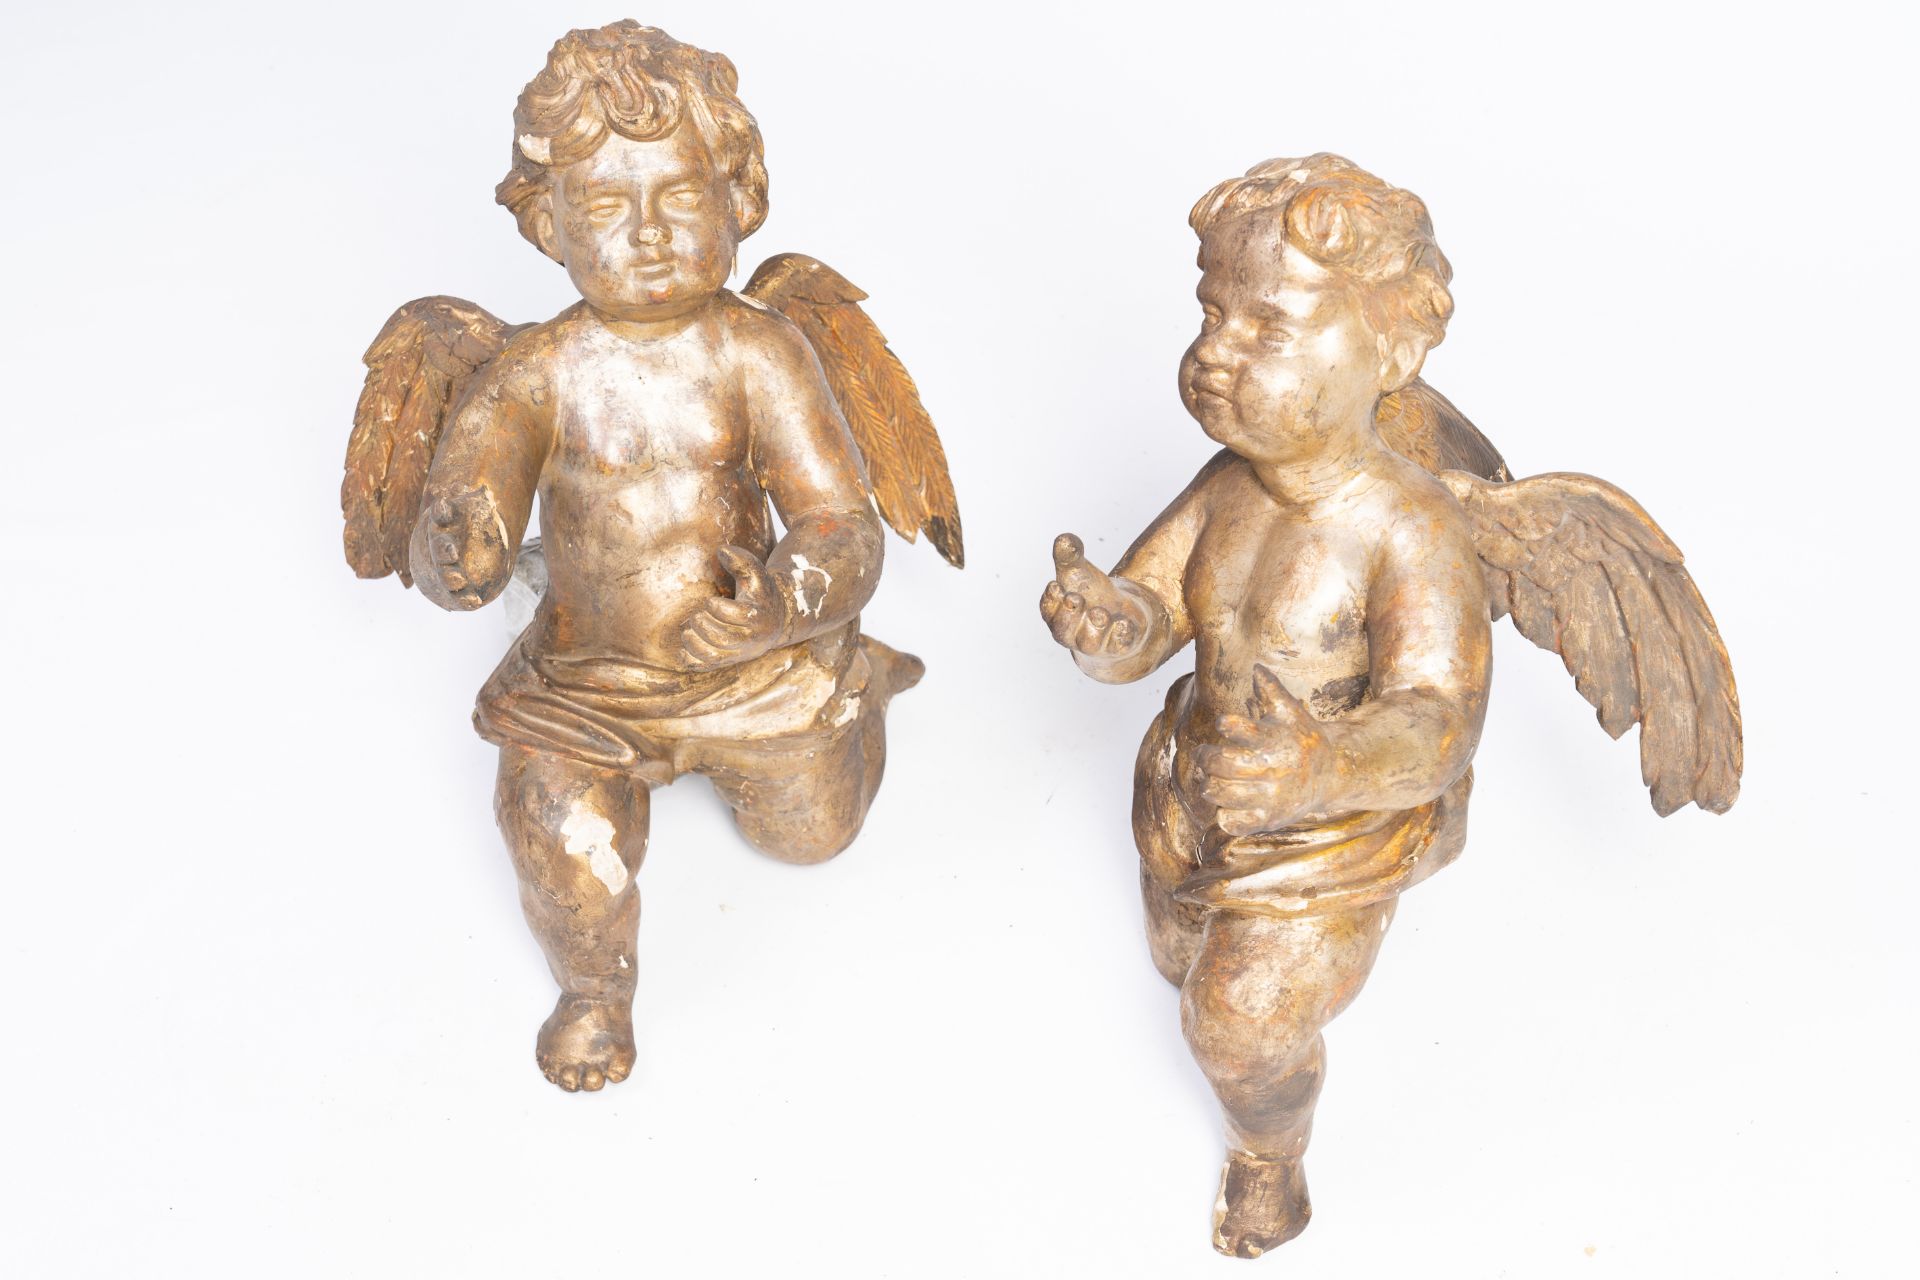 A pair of large gilded wood sculptures of angels, probably Flanders, first half 18th C.